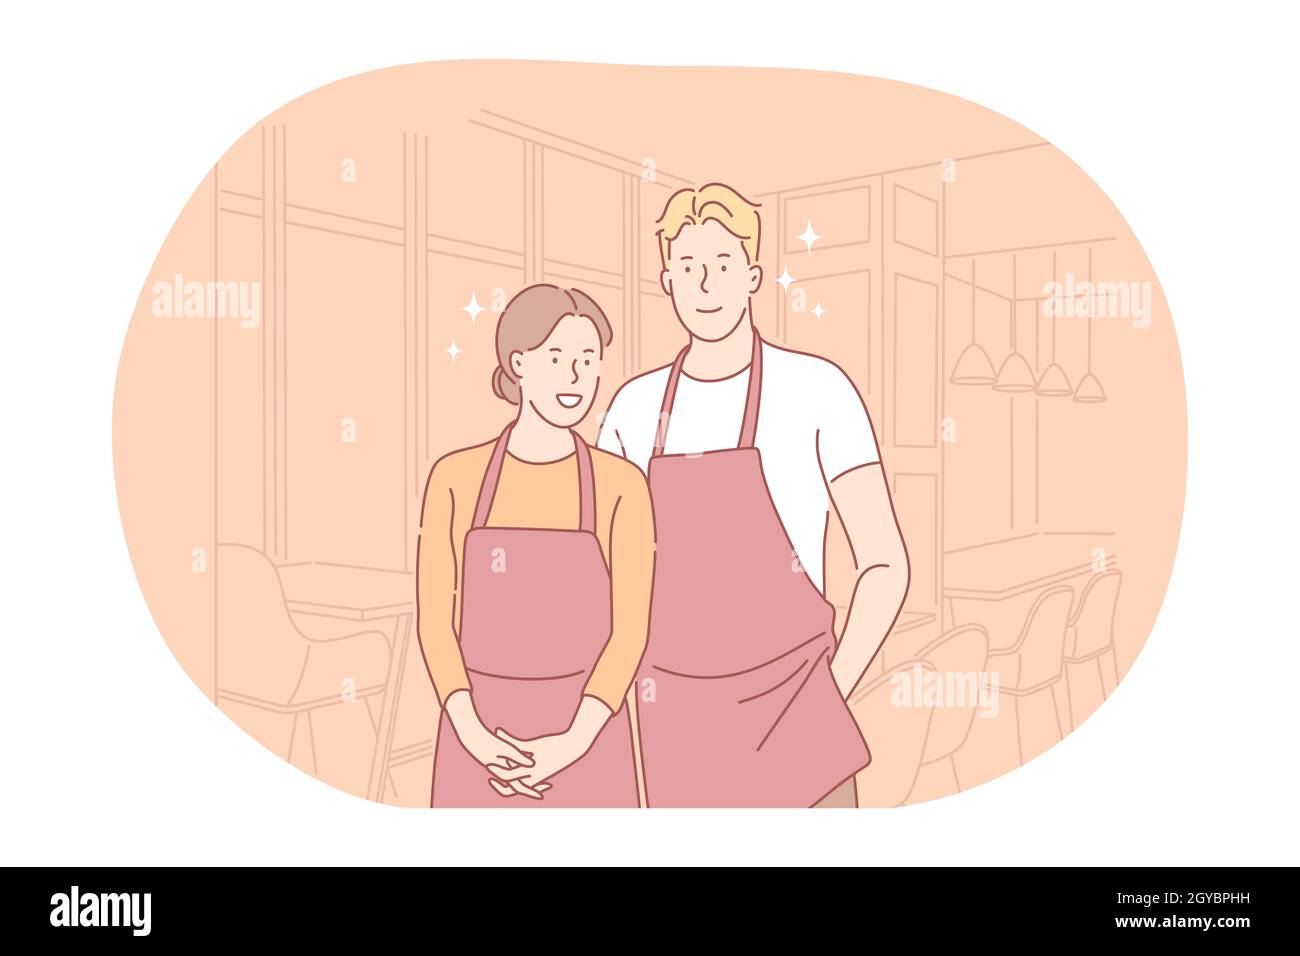 Work or part-time job for young people, occupation concept. Young smiling man and woman waiters cartoon characters in red aprons standing in restauran Stock Photo